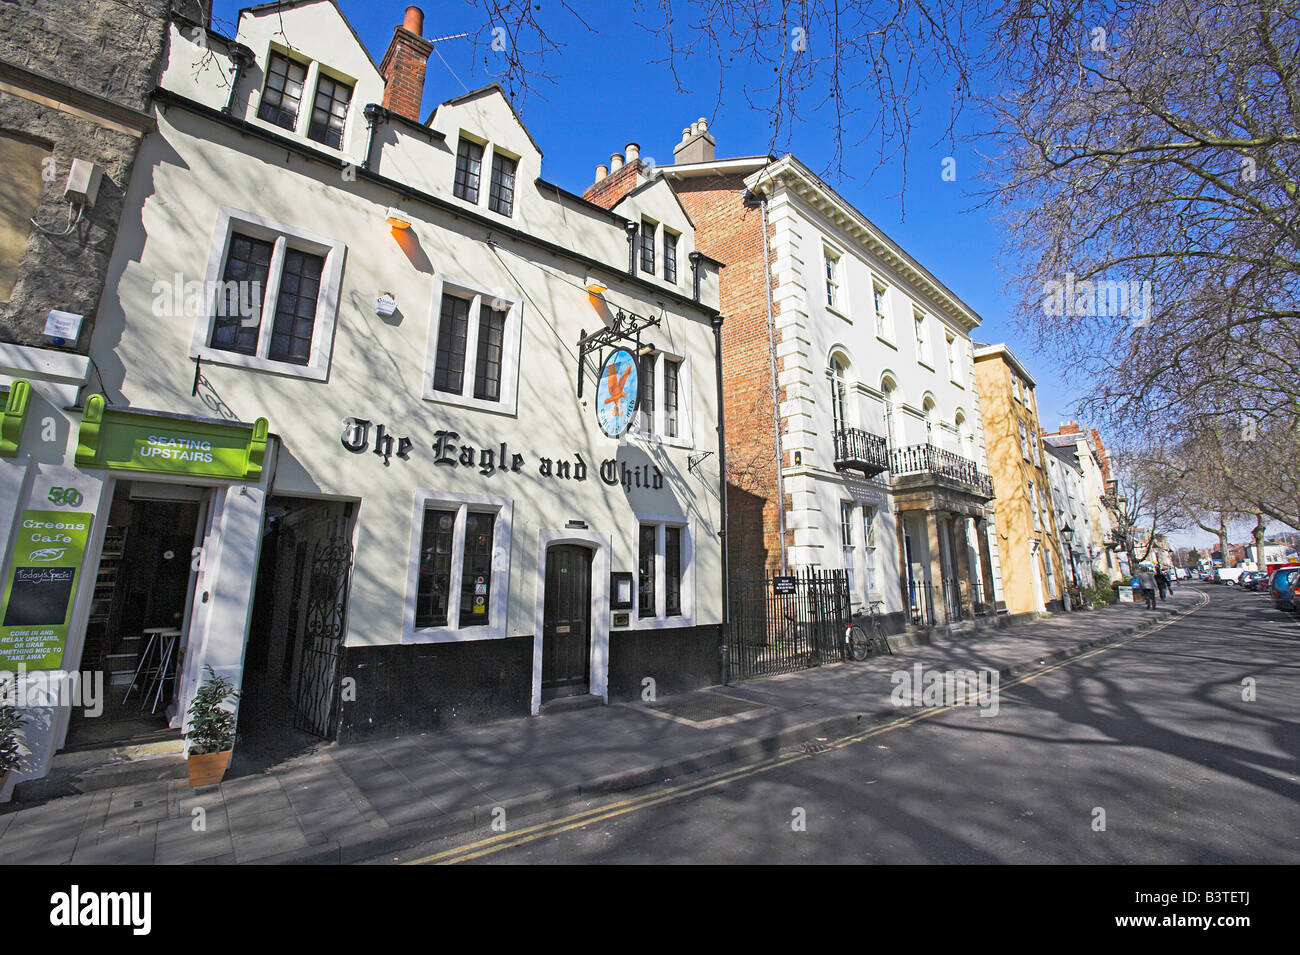 England, Oxford. The Eagle and Child pub. During the 1950s and 1960s, CS Lewis and JRR Tolkein would meet here, along with their circle of literary friends known as 'The Inklings' to read and discuss their latest work, including the Chronicles of Narnia and The Lord of the Rings. Stock Photo